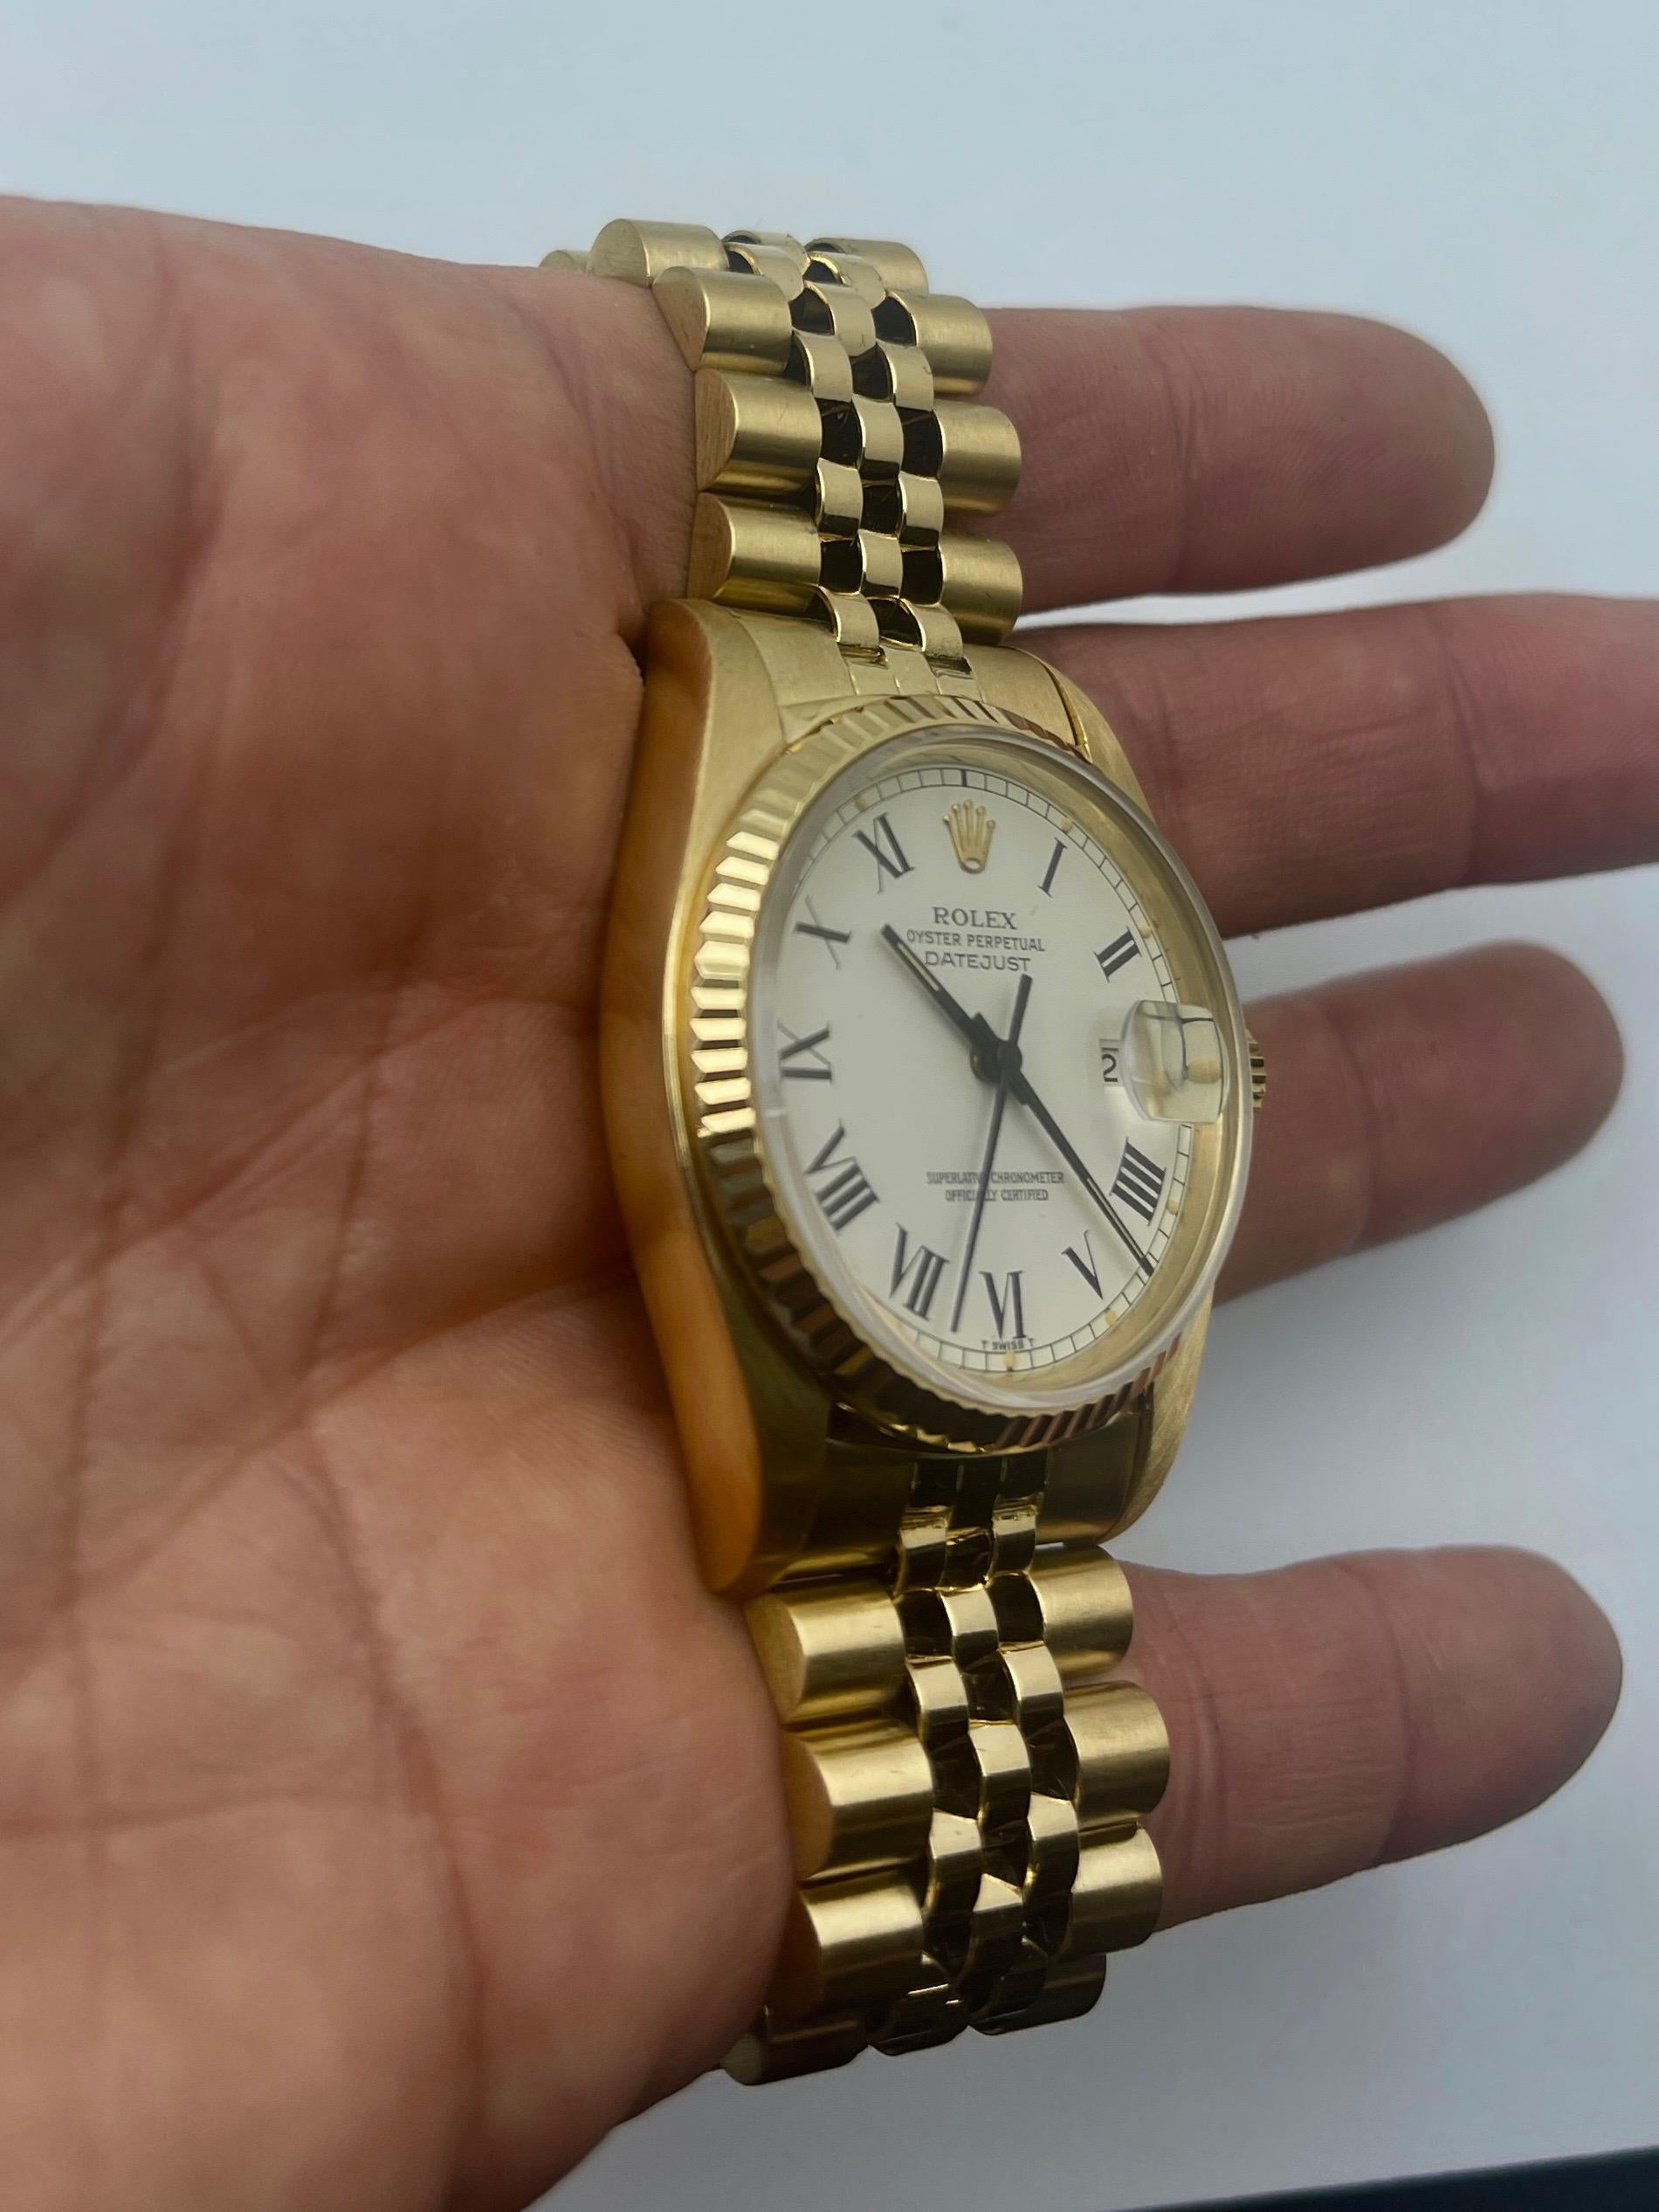 Rolex Datejust 18k Gold Reference 16018 Watch 3